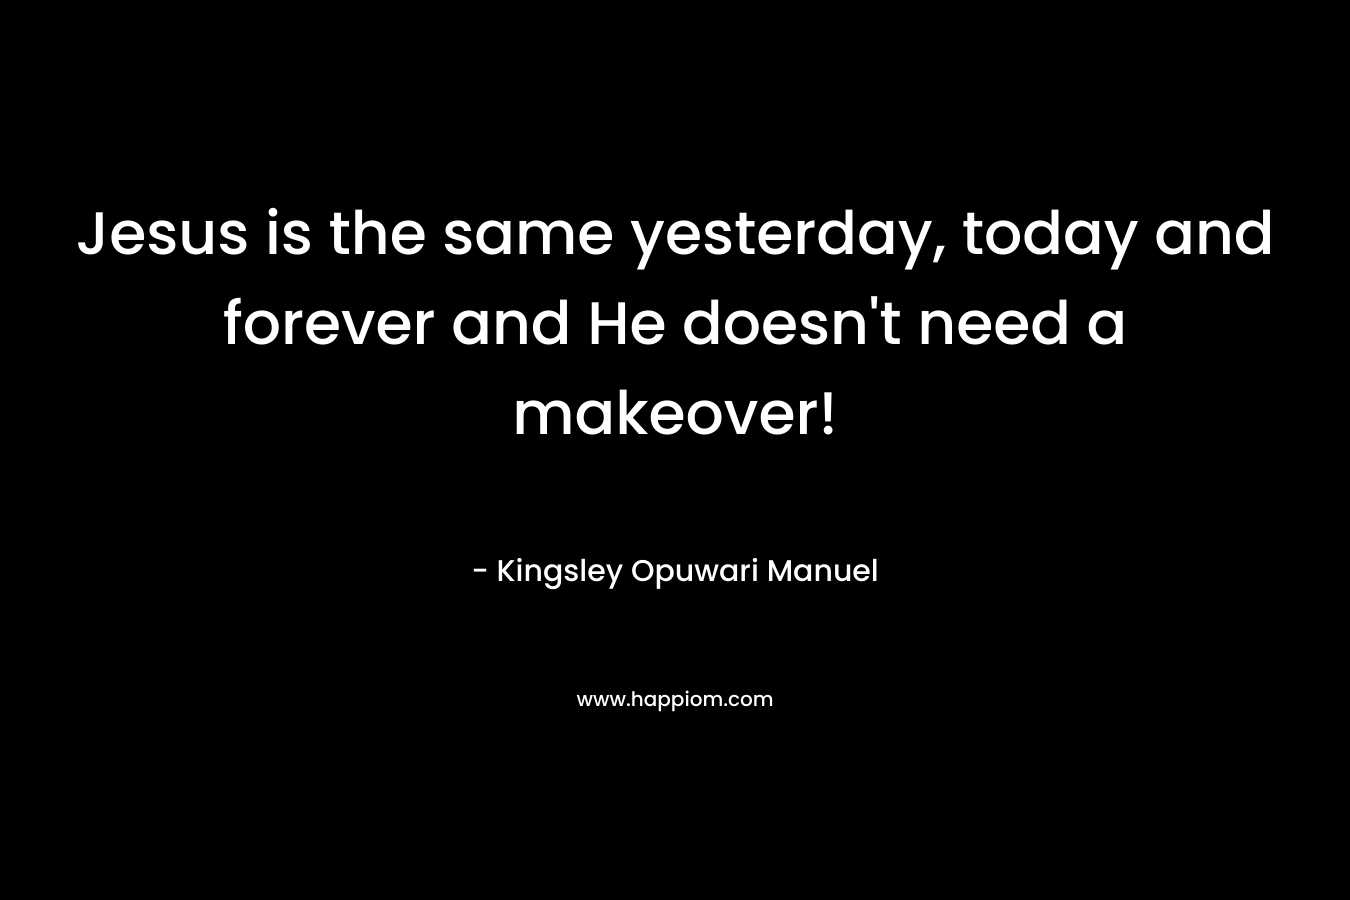 Jesus is the same yesterday, today and forever and He doesn’t need a makeover! – Kingsley Opuwari Manuel